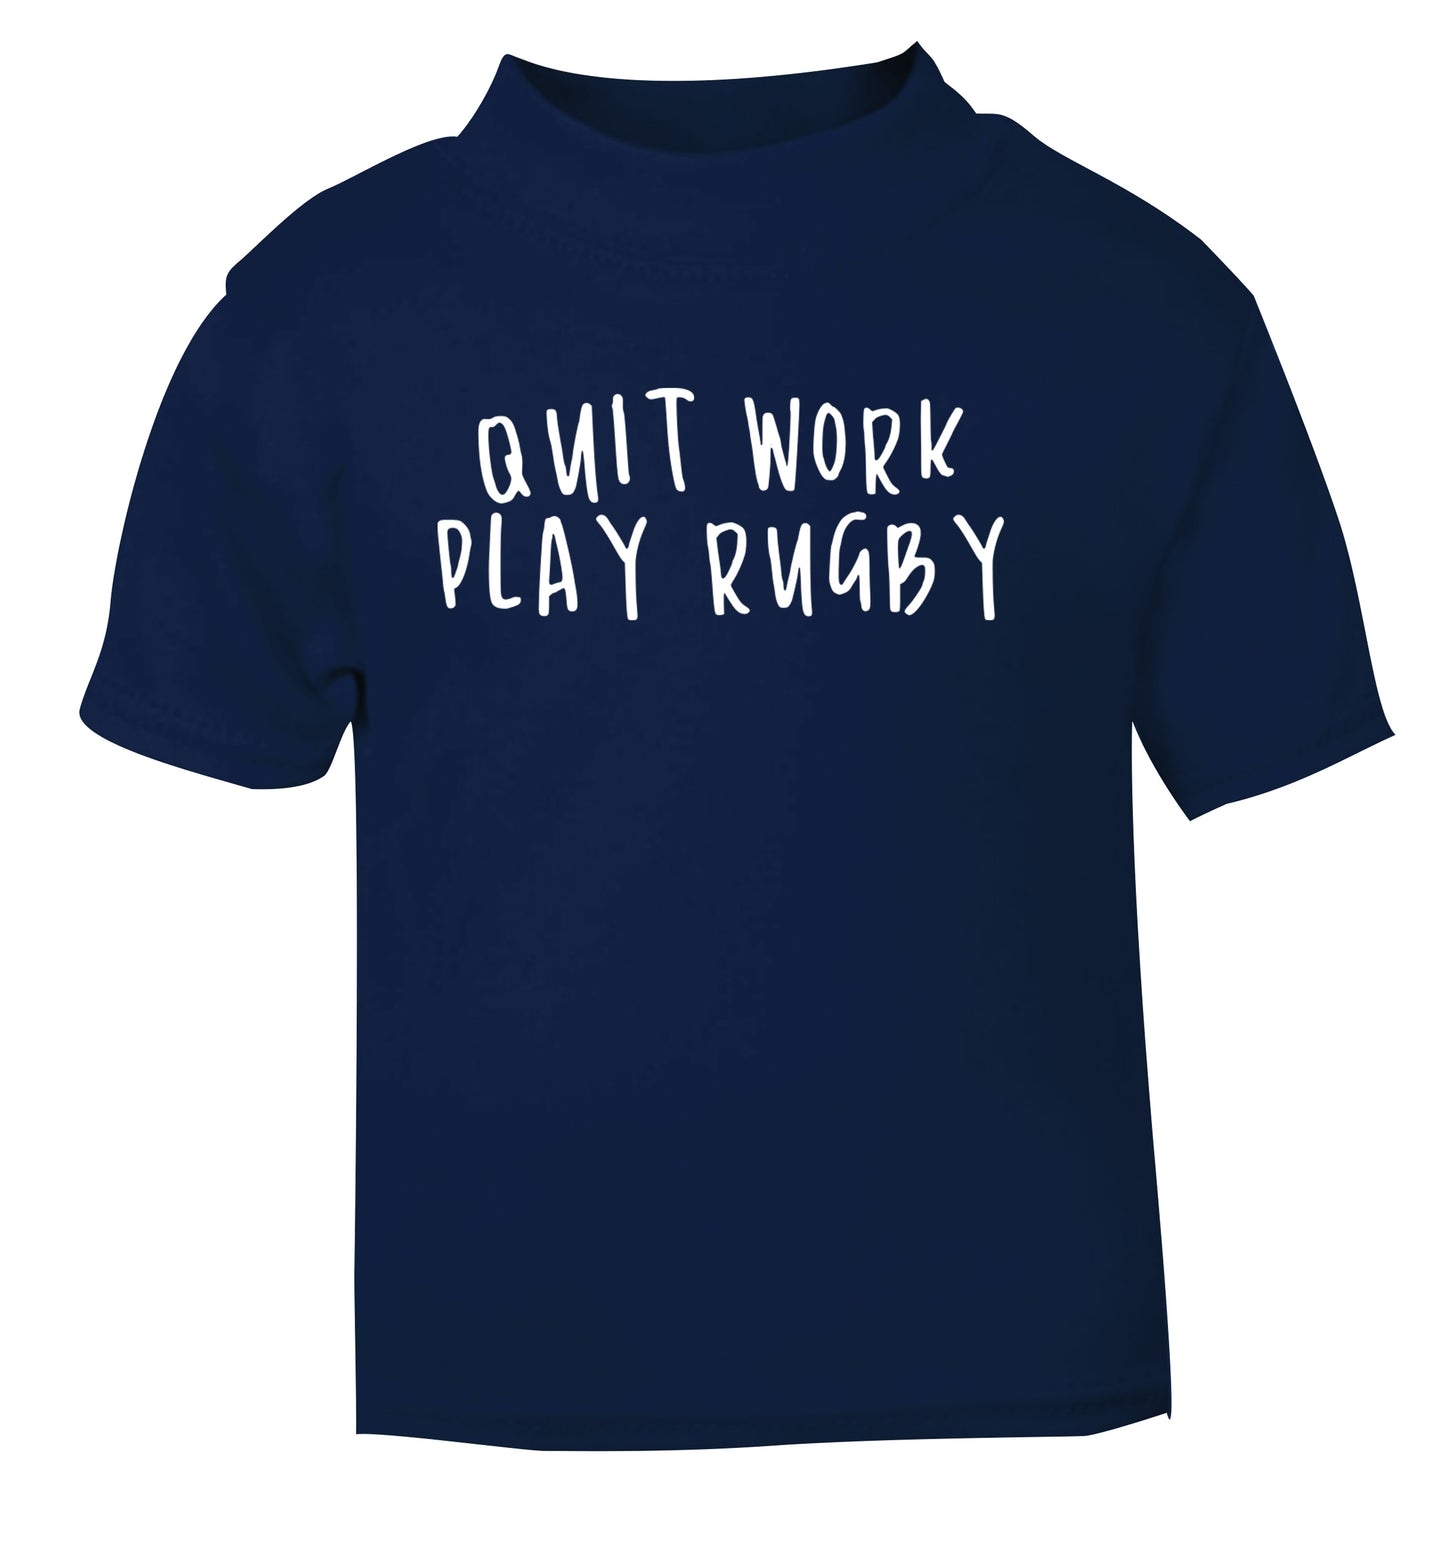 Quit work play rugby navy Baby Toddler Tshirt 2 Years